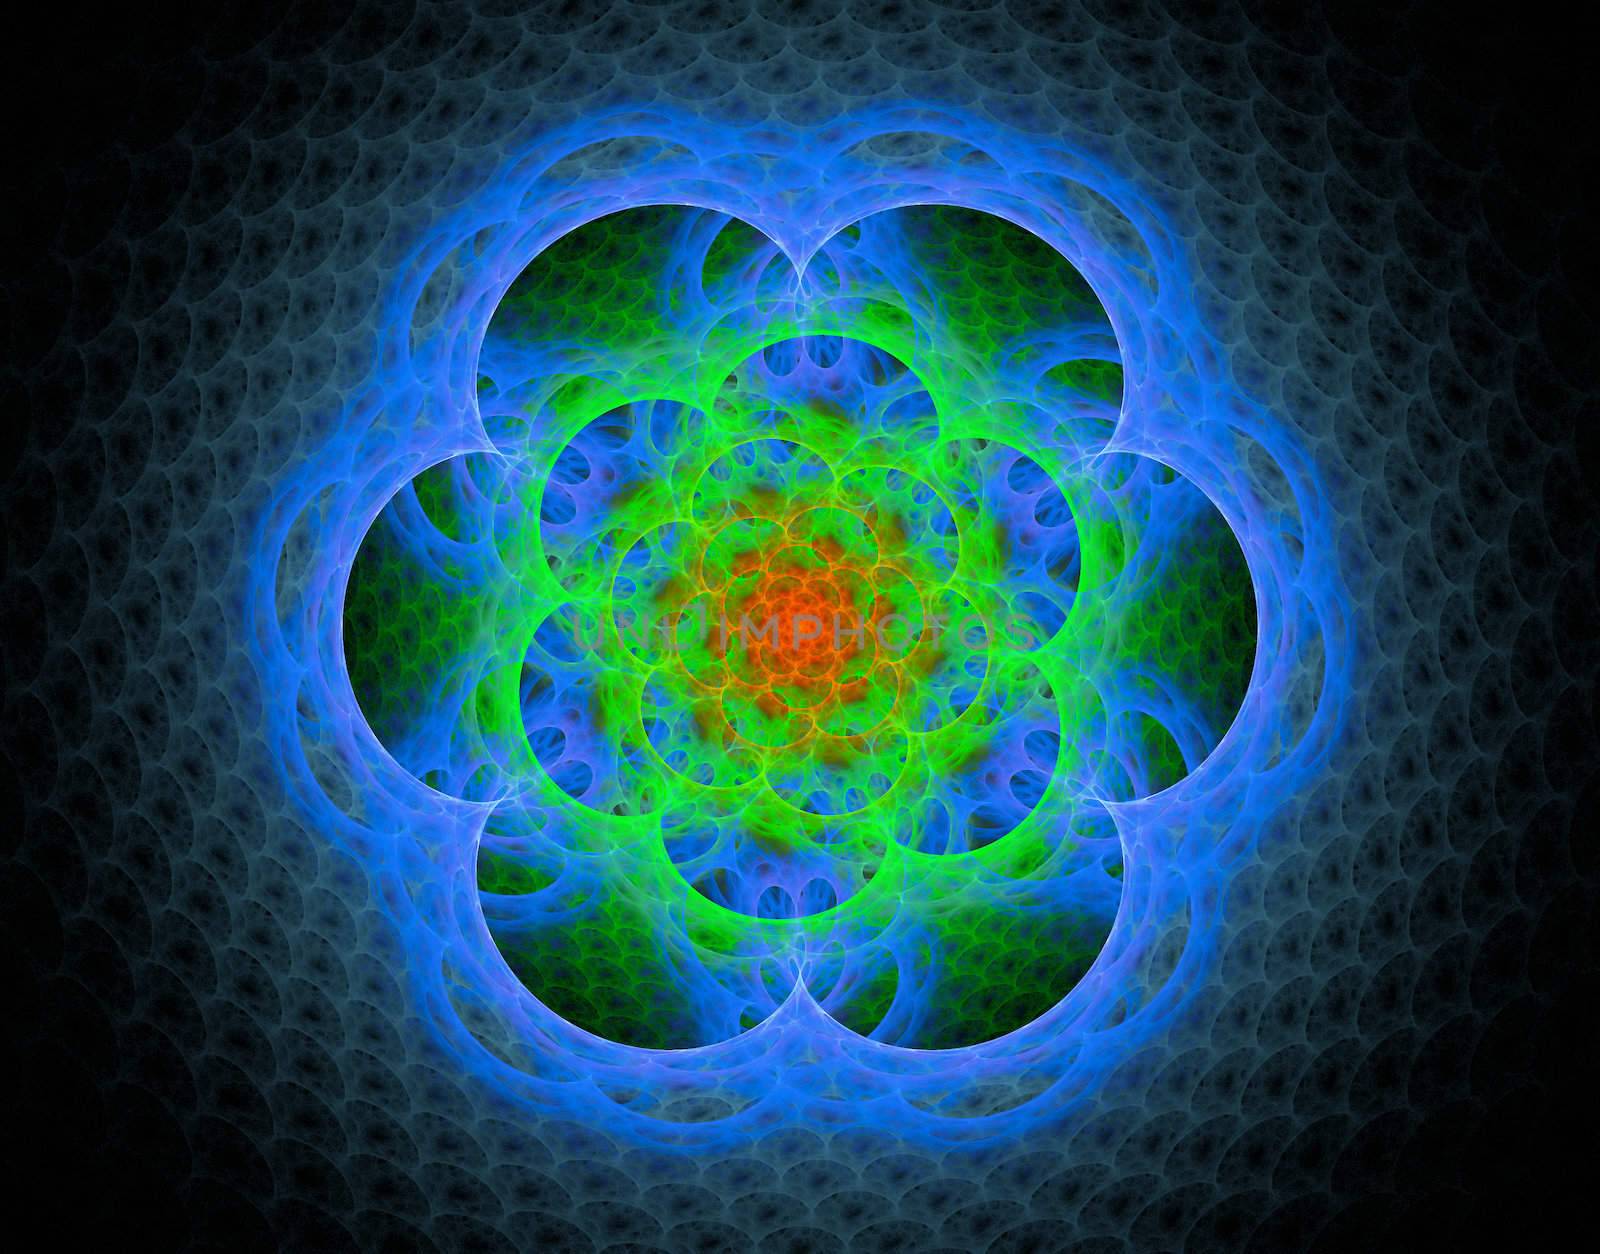 The symmetric and original image as a flower generated by the computer program. I store at myself in archive an initial file with the alpha - channel.
